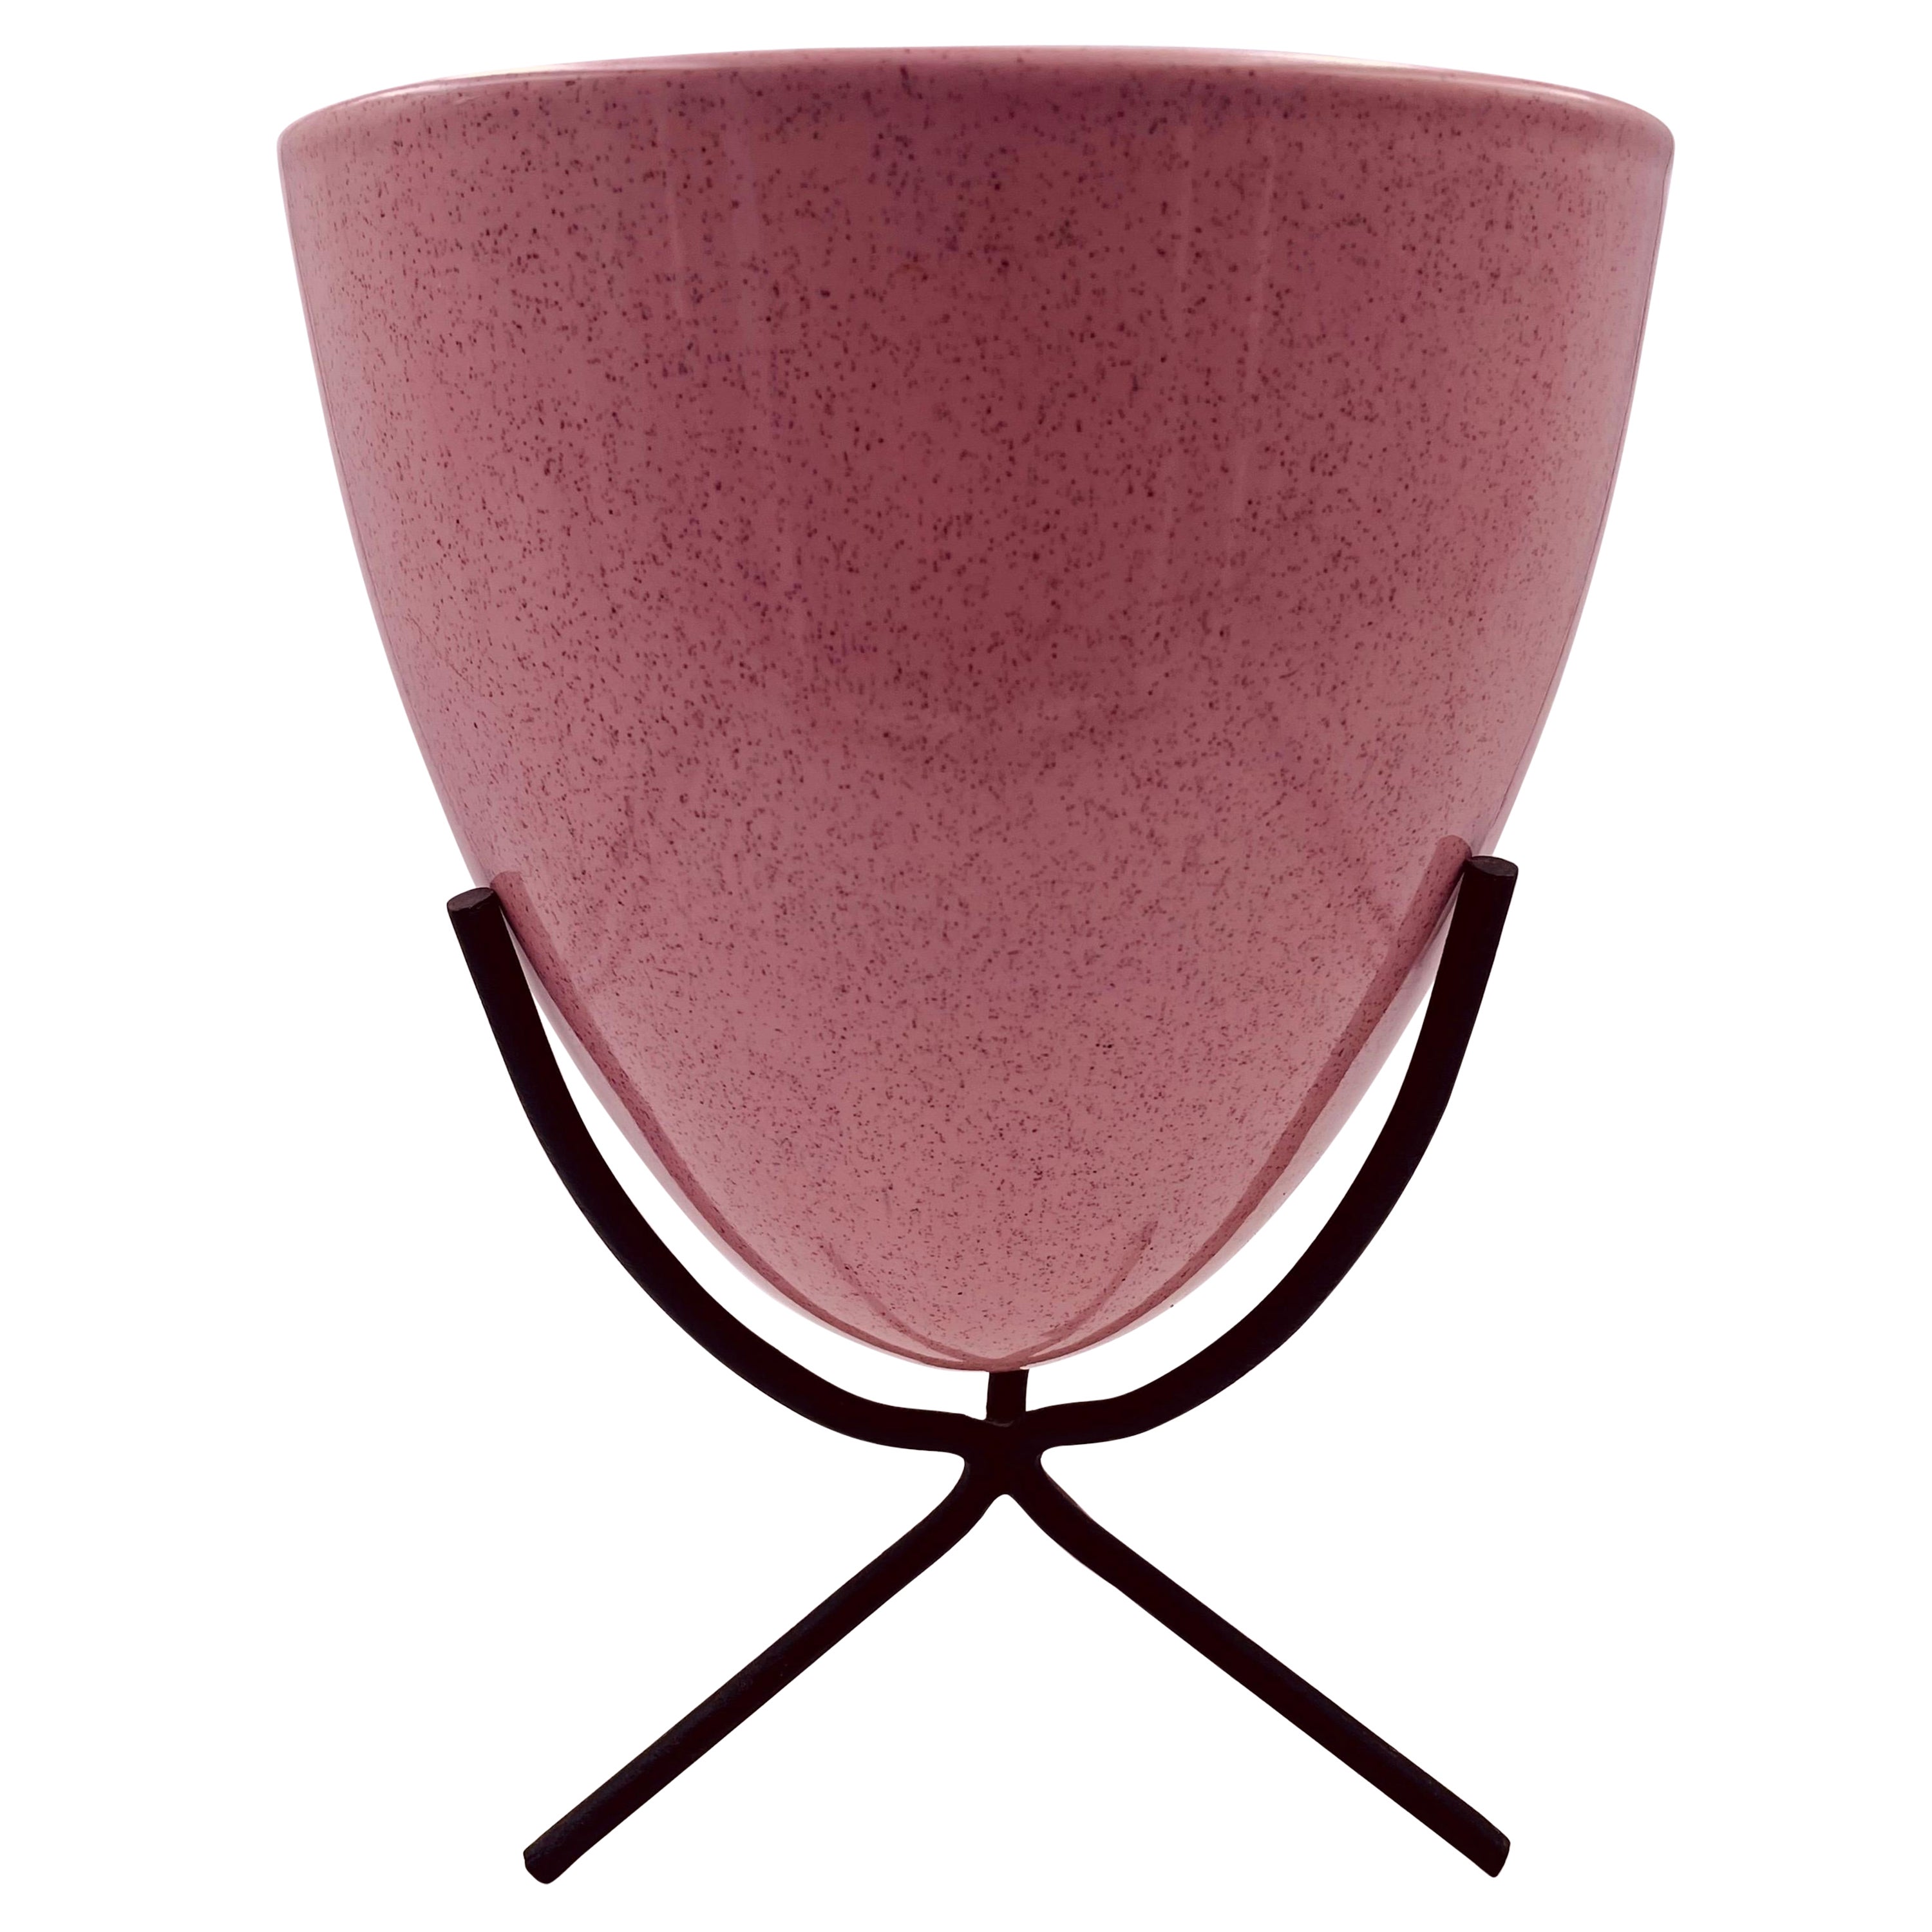 Rare Atomic Age Ceramic Bullet Planter on the Stand by Bauer in Pink